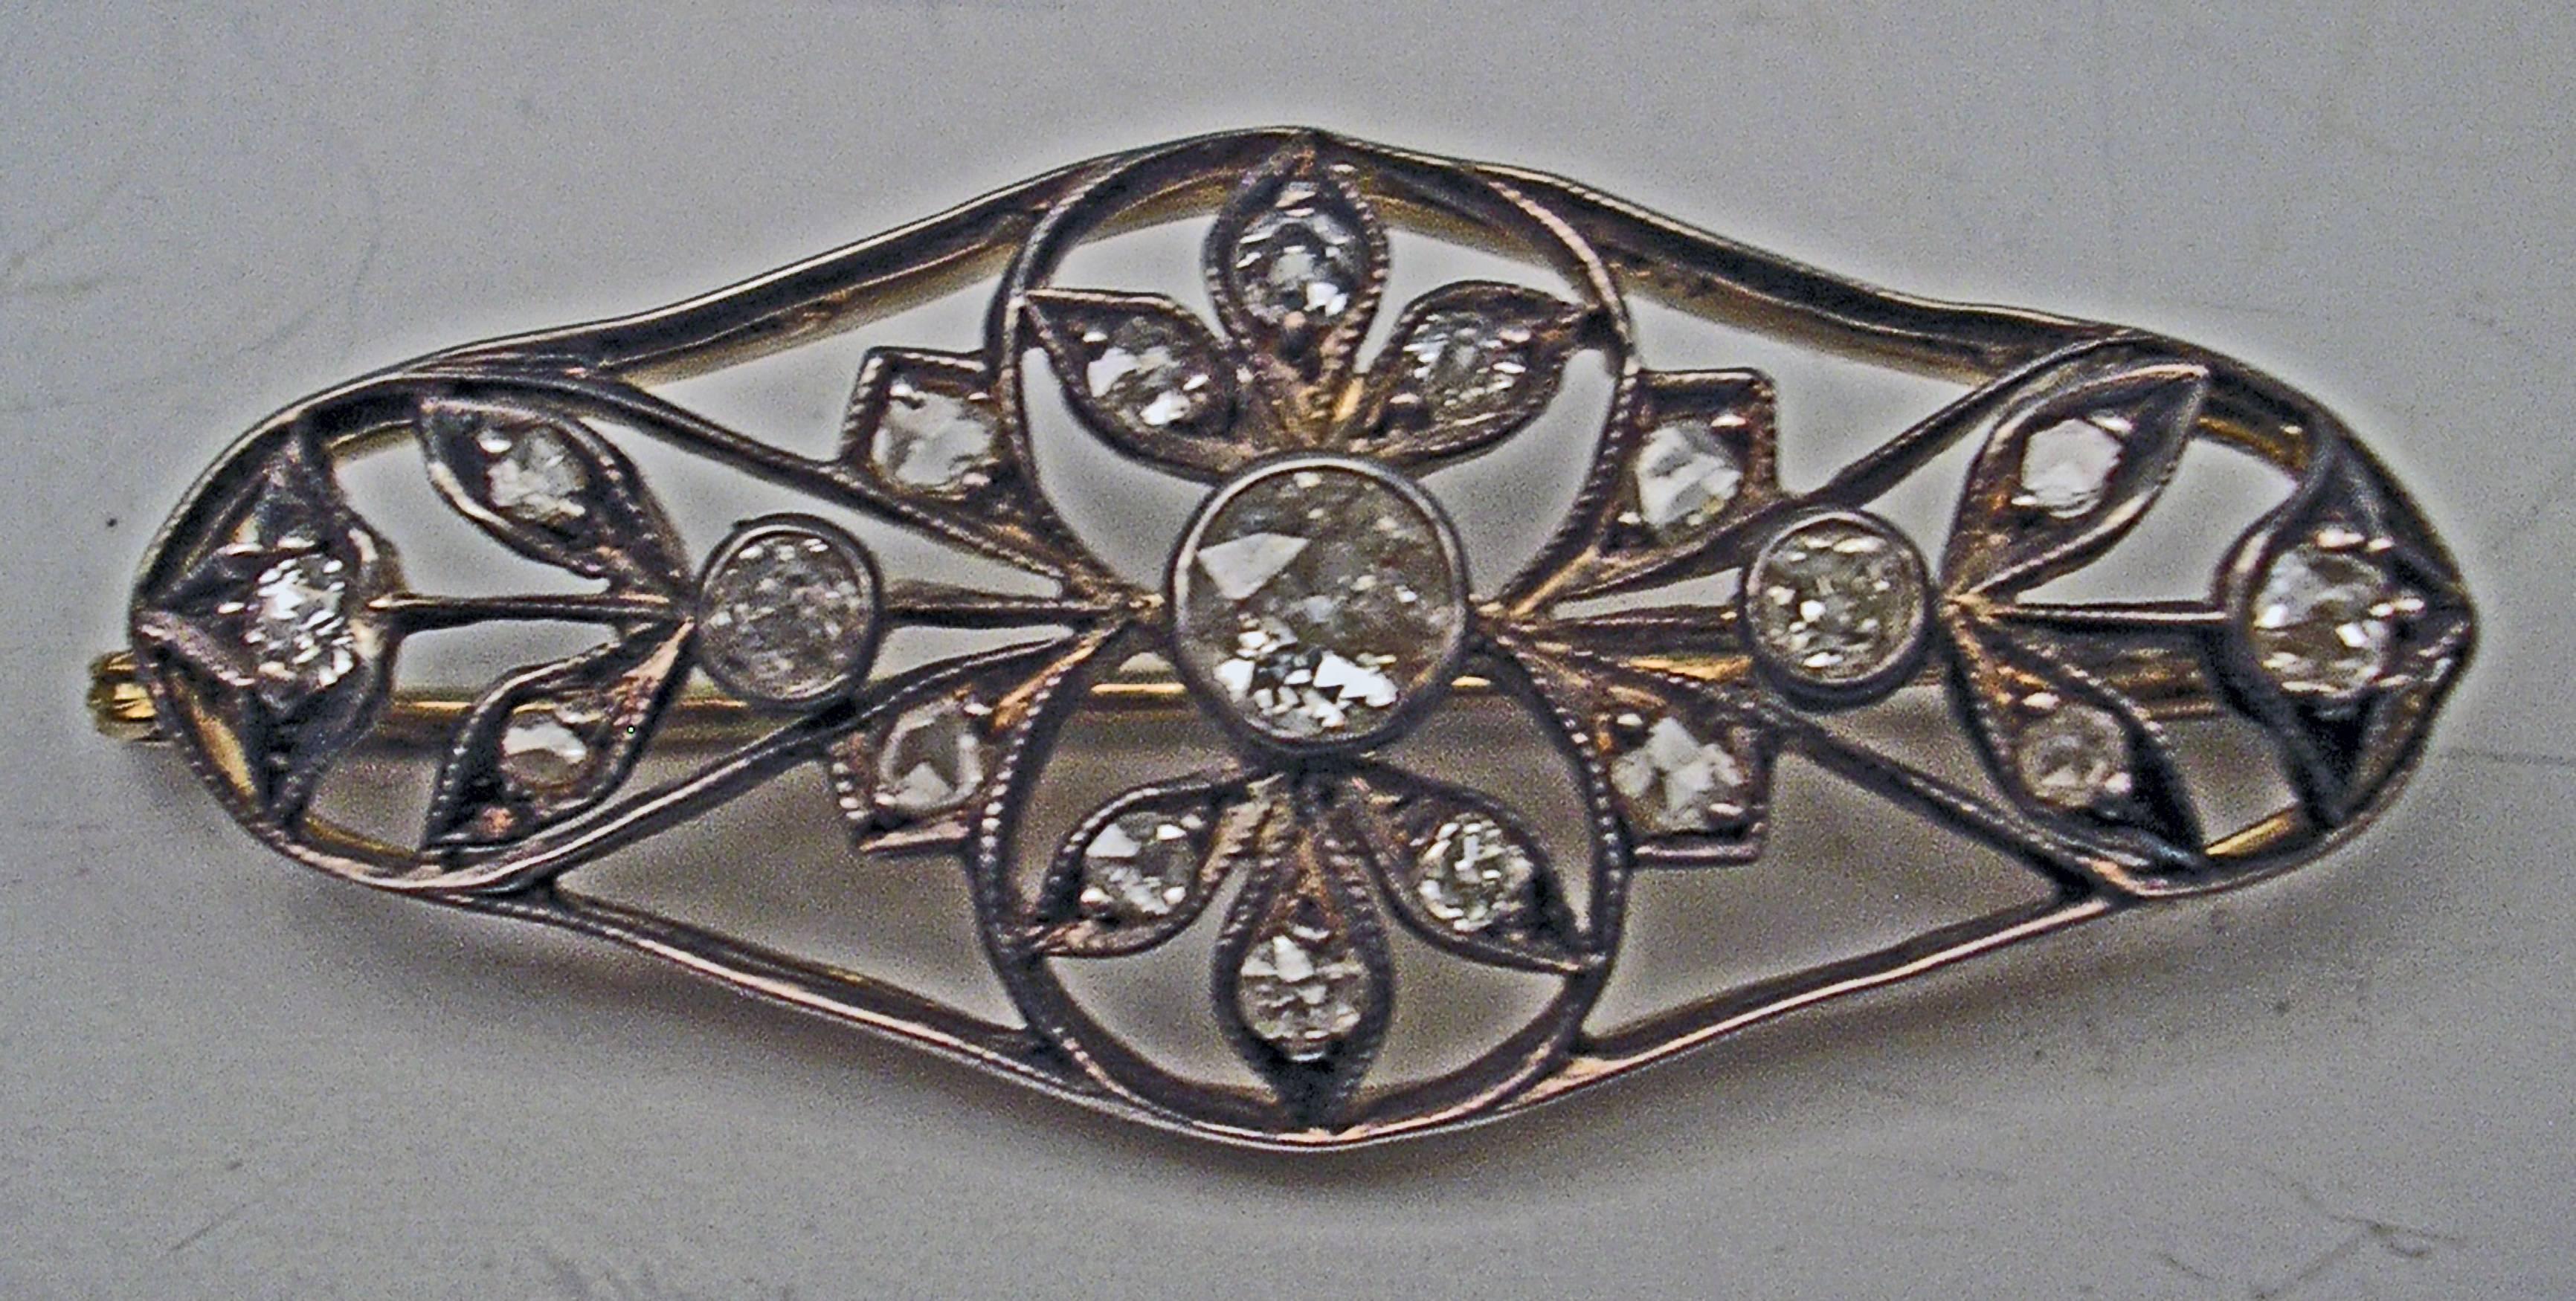 1900s Art Nouveau Diamonds 0.50 Carat Gold Flower Brooch In Excellent Condition For Sale In Vienna, AT